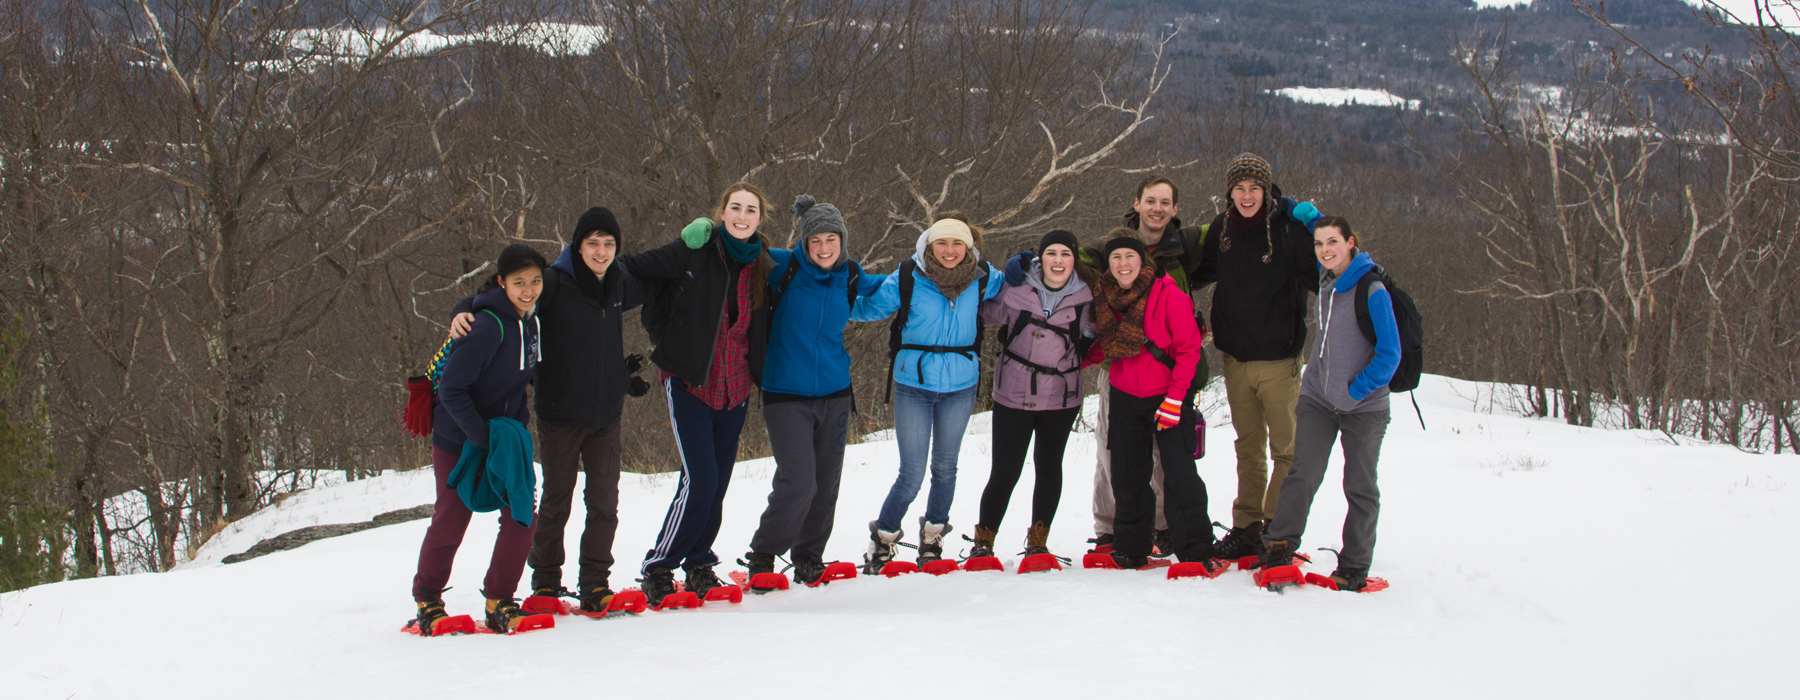 group snowshoeing